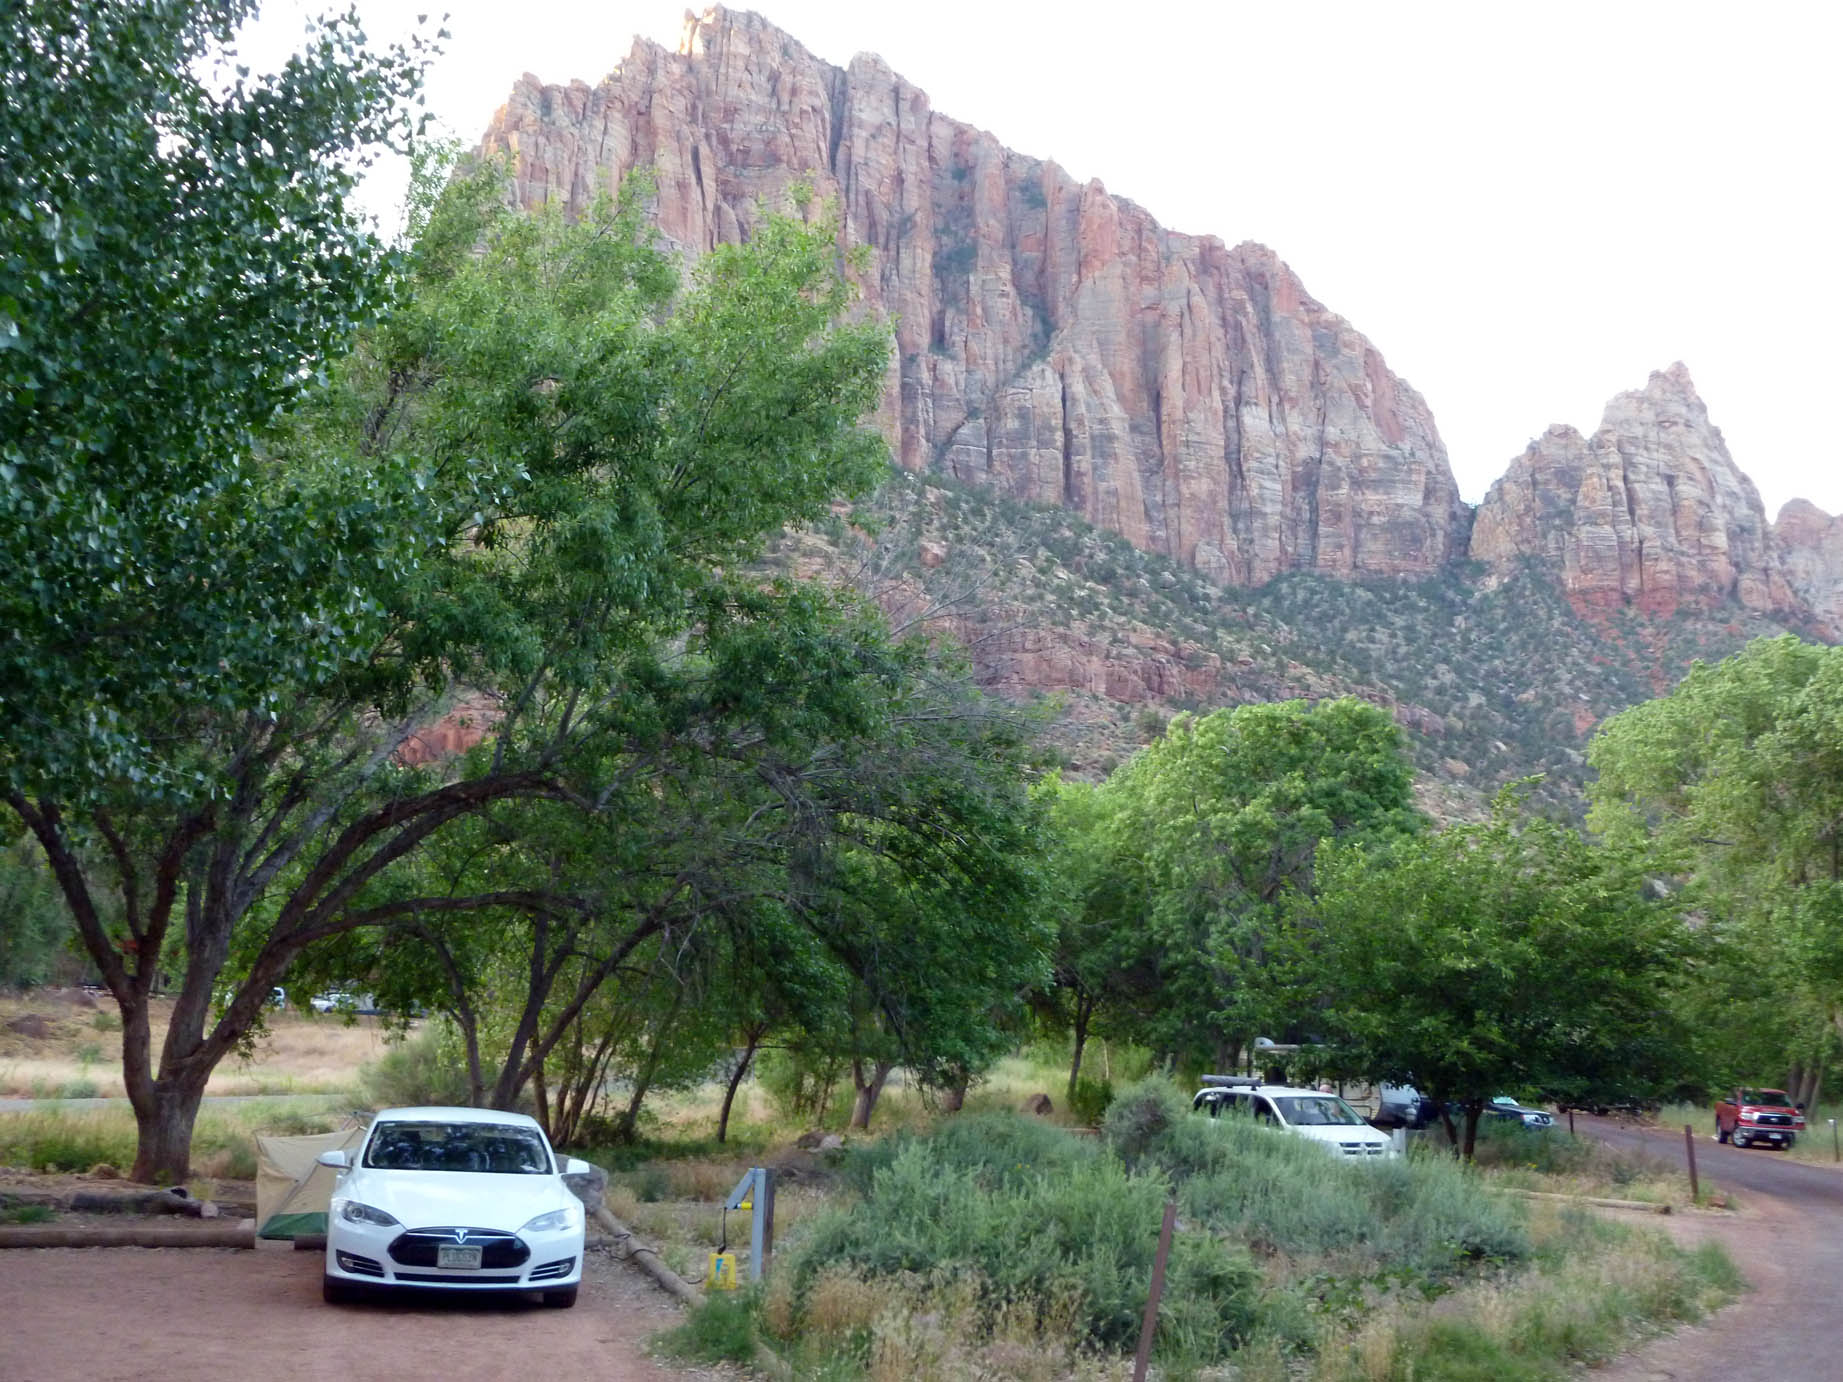 Model S at campsite Zion NP1683sf 6-10-16.jpg